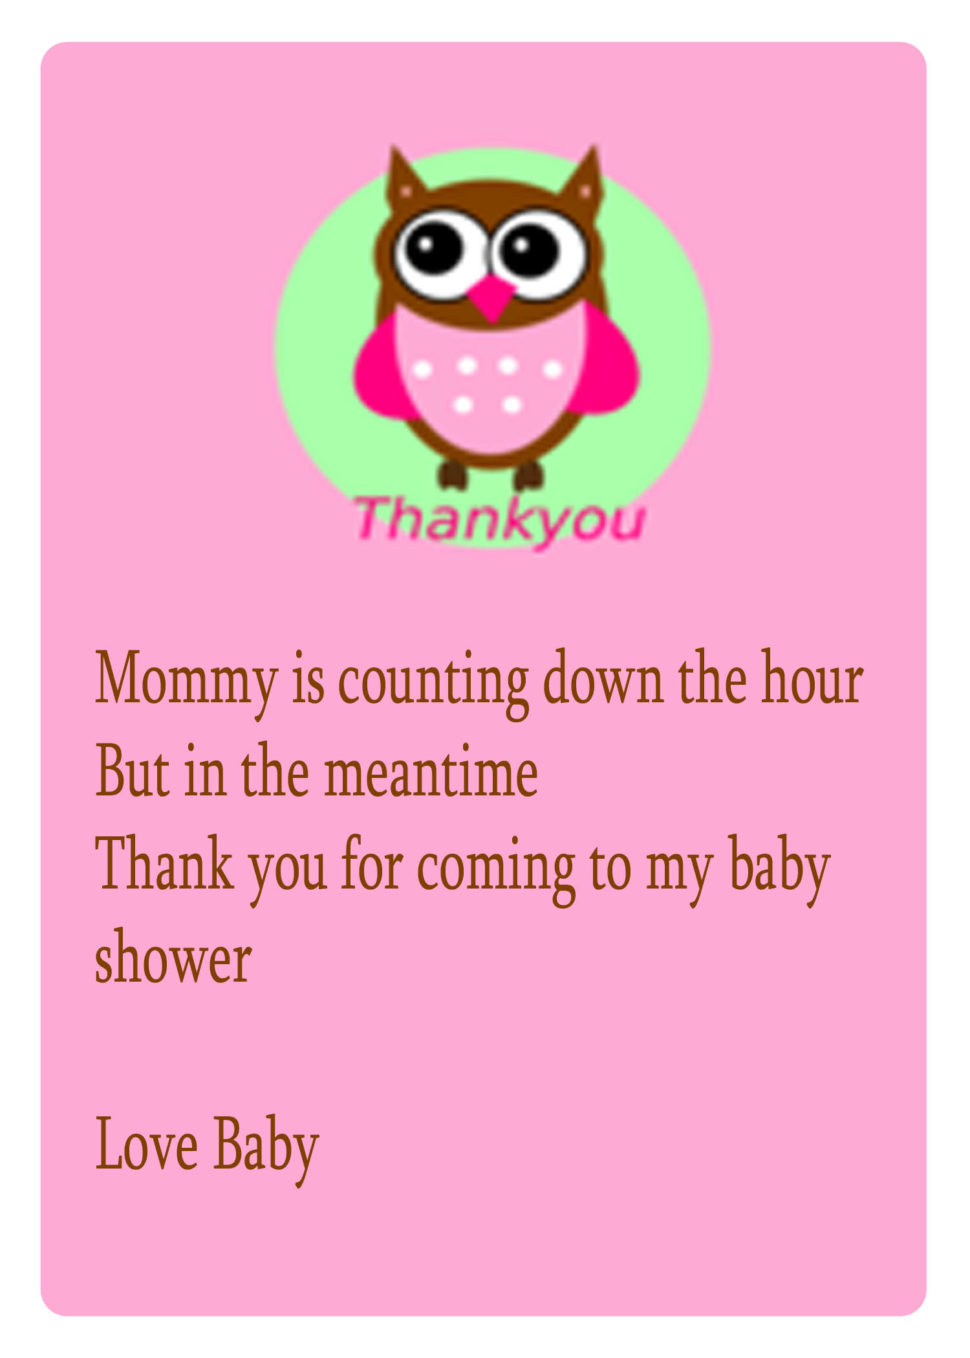 Medium Size of Baby Shower:72+ Rousing Baby Shower Thank You Cards Picture Ideas Baby Shower Cake Ideas Baby Shower Decorations Baby Shower Tableware Juegos Para Baby Shower